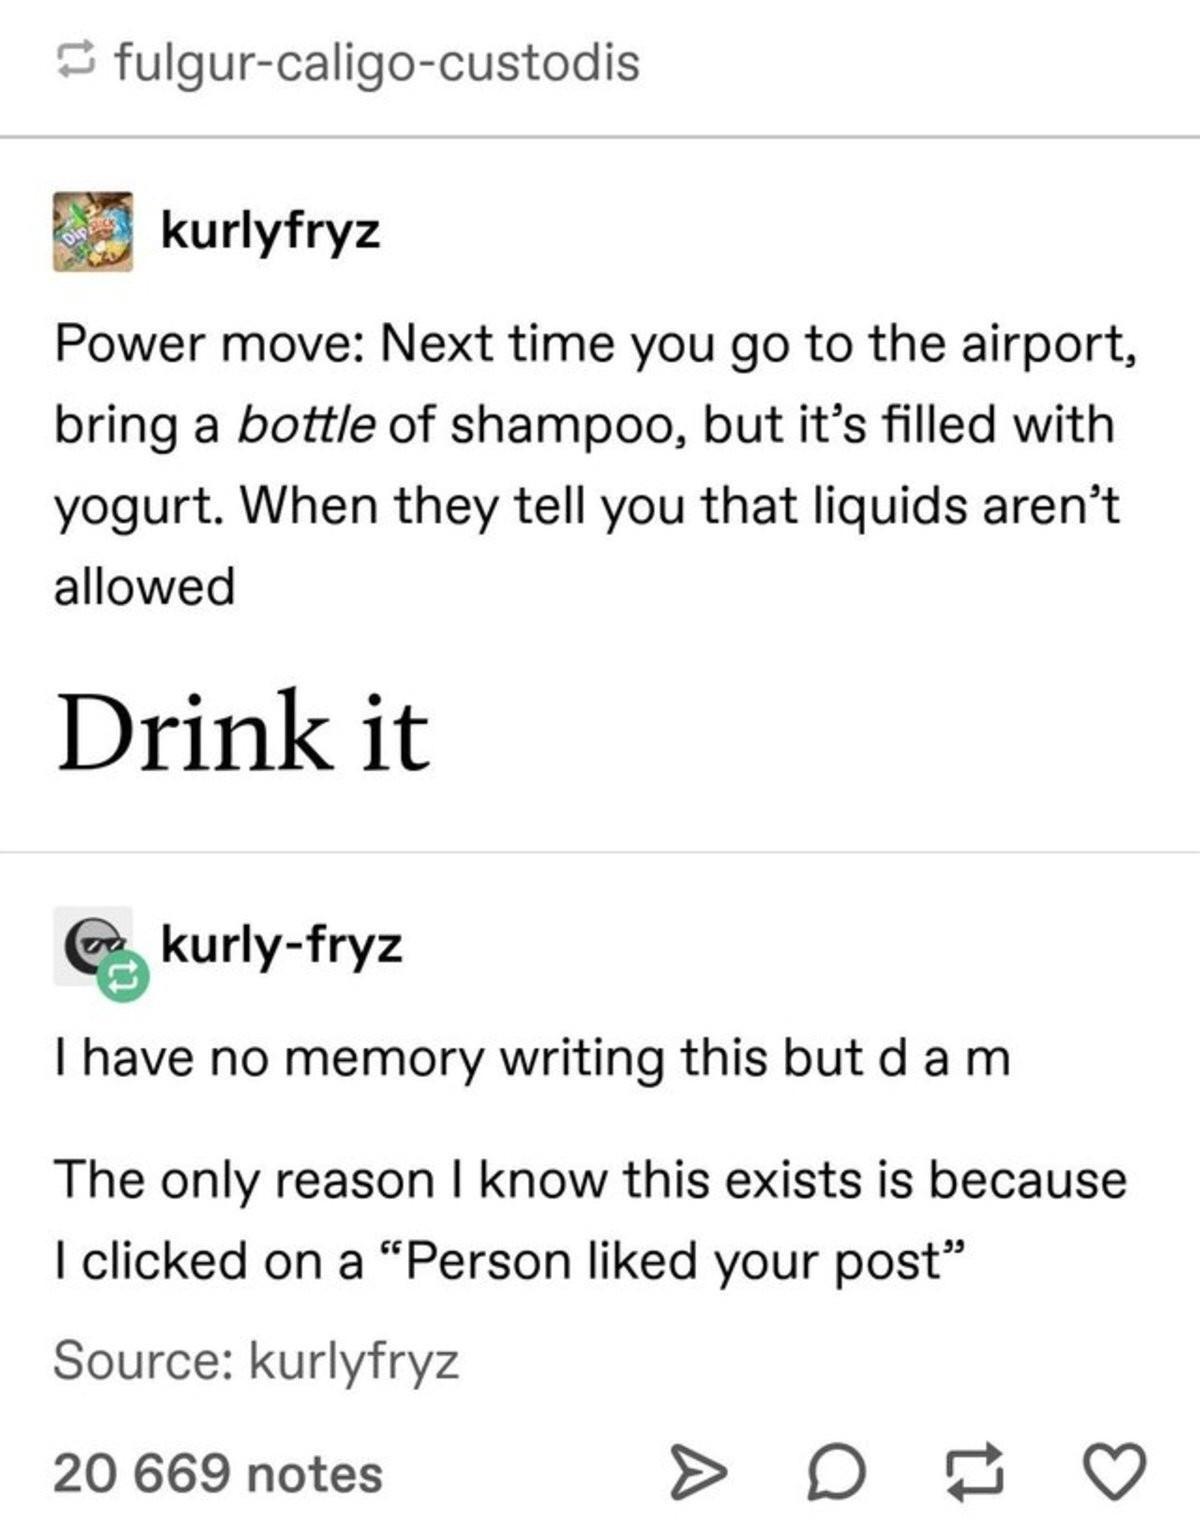 funny reddit posts - fulgurcaligocustodis kurlyfryz Power move Next time you go to the airport, bring a bottle of shampoo, but it's filled with yogurt. When they tell you that liquids aren't allowed Drink it kurlyfryz I have no memory writing this but d a